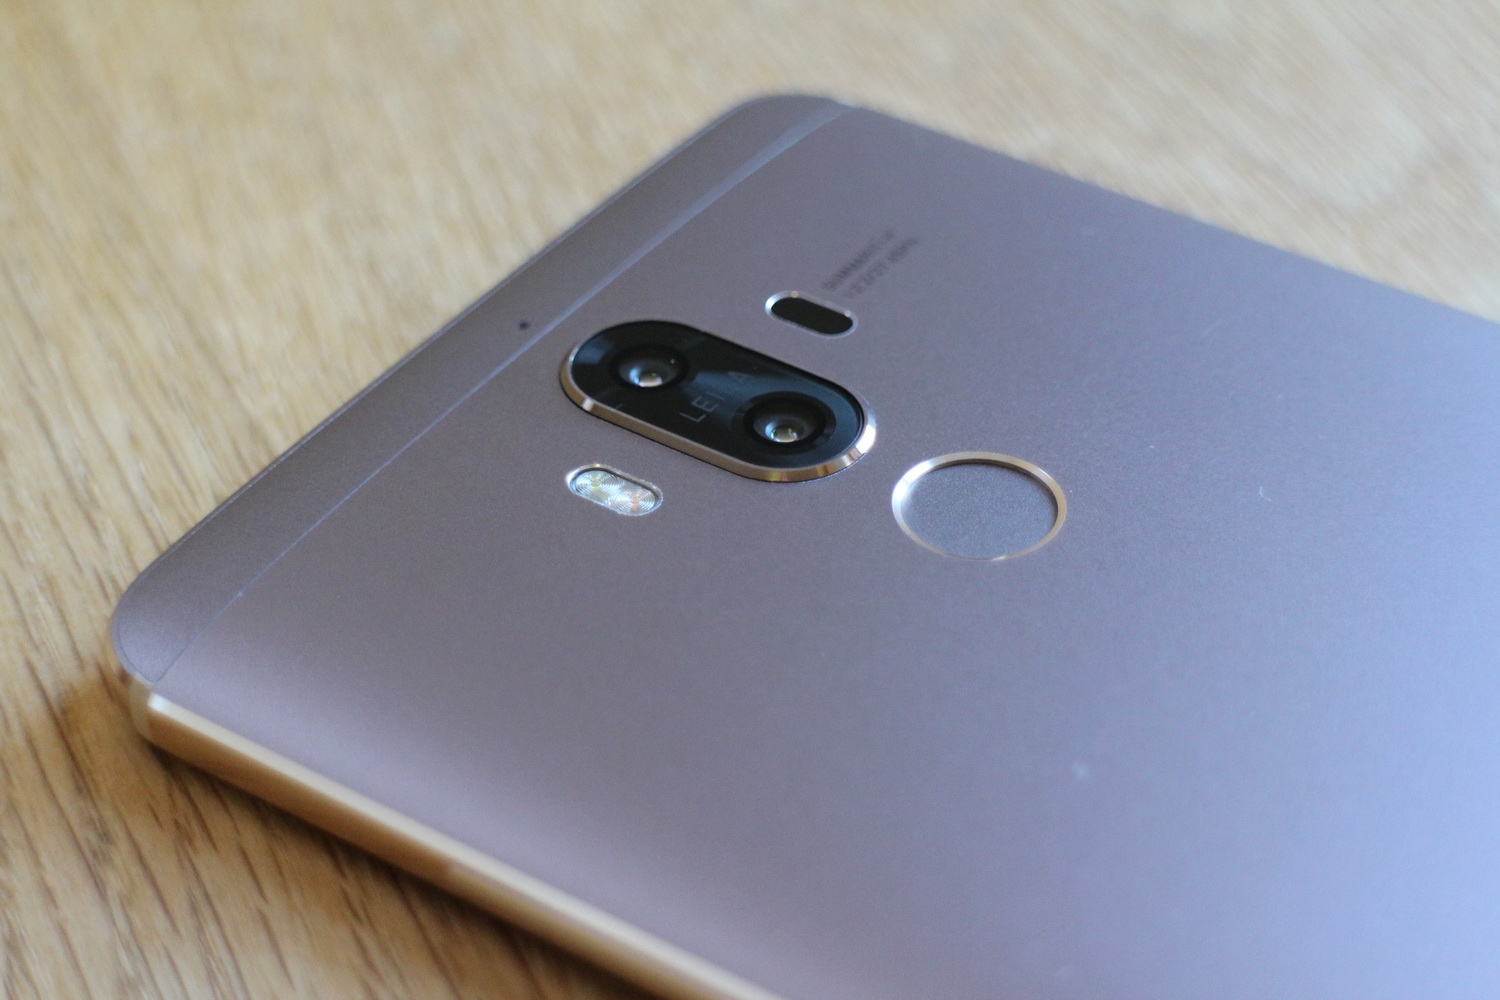 Vermenigvuldiging negeren invoegen Everything You Need To Know About The Huawei Mate 9 | Digital Trends